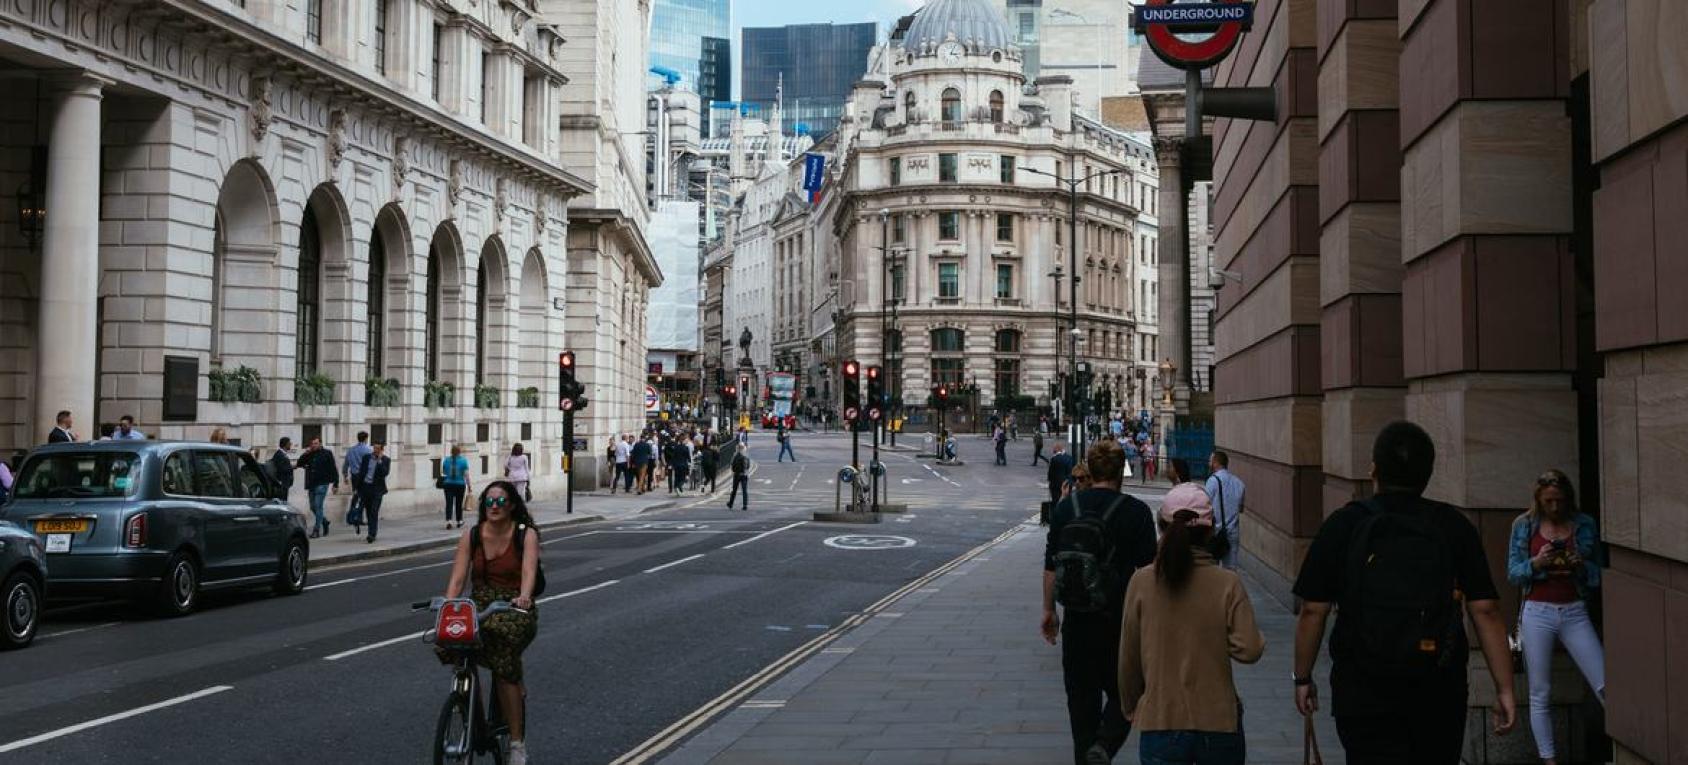 An intersection in London with old bank buildings in the background and people crossing the street in the foreground